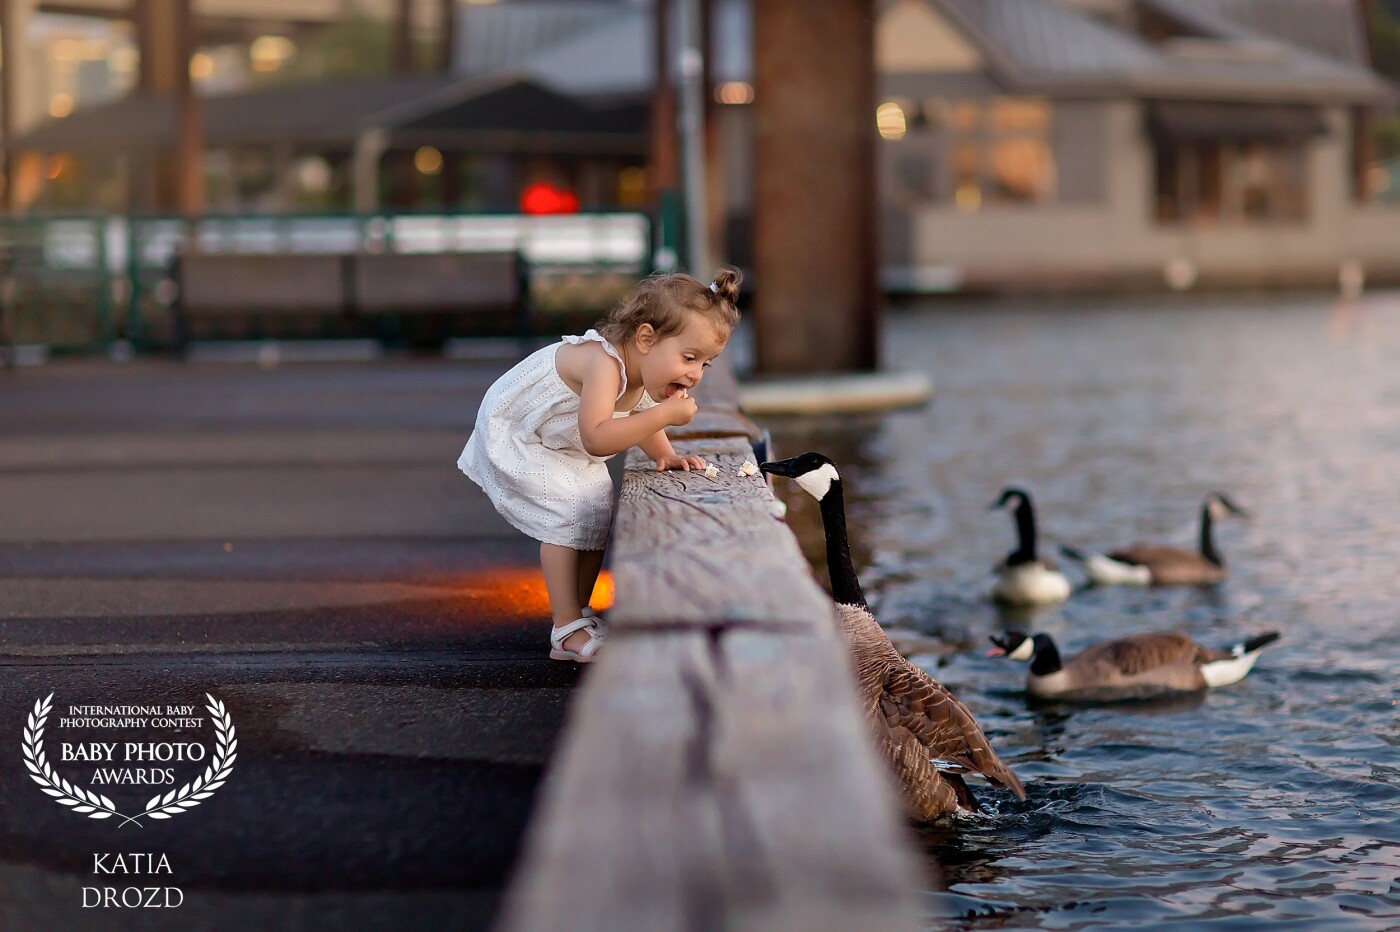 I captured this picture on one warm evening last summer. I watched how my daughter was feeding ducks and could not miss capturing this interesting and amazing moment